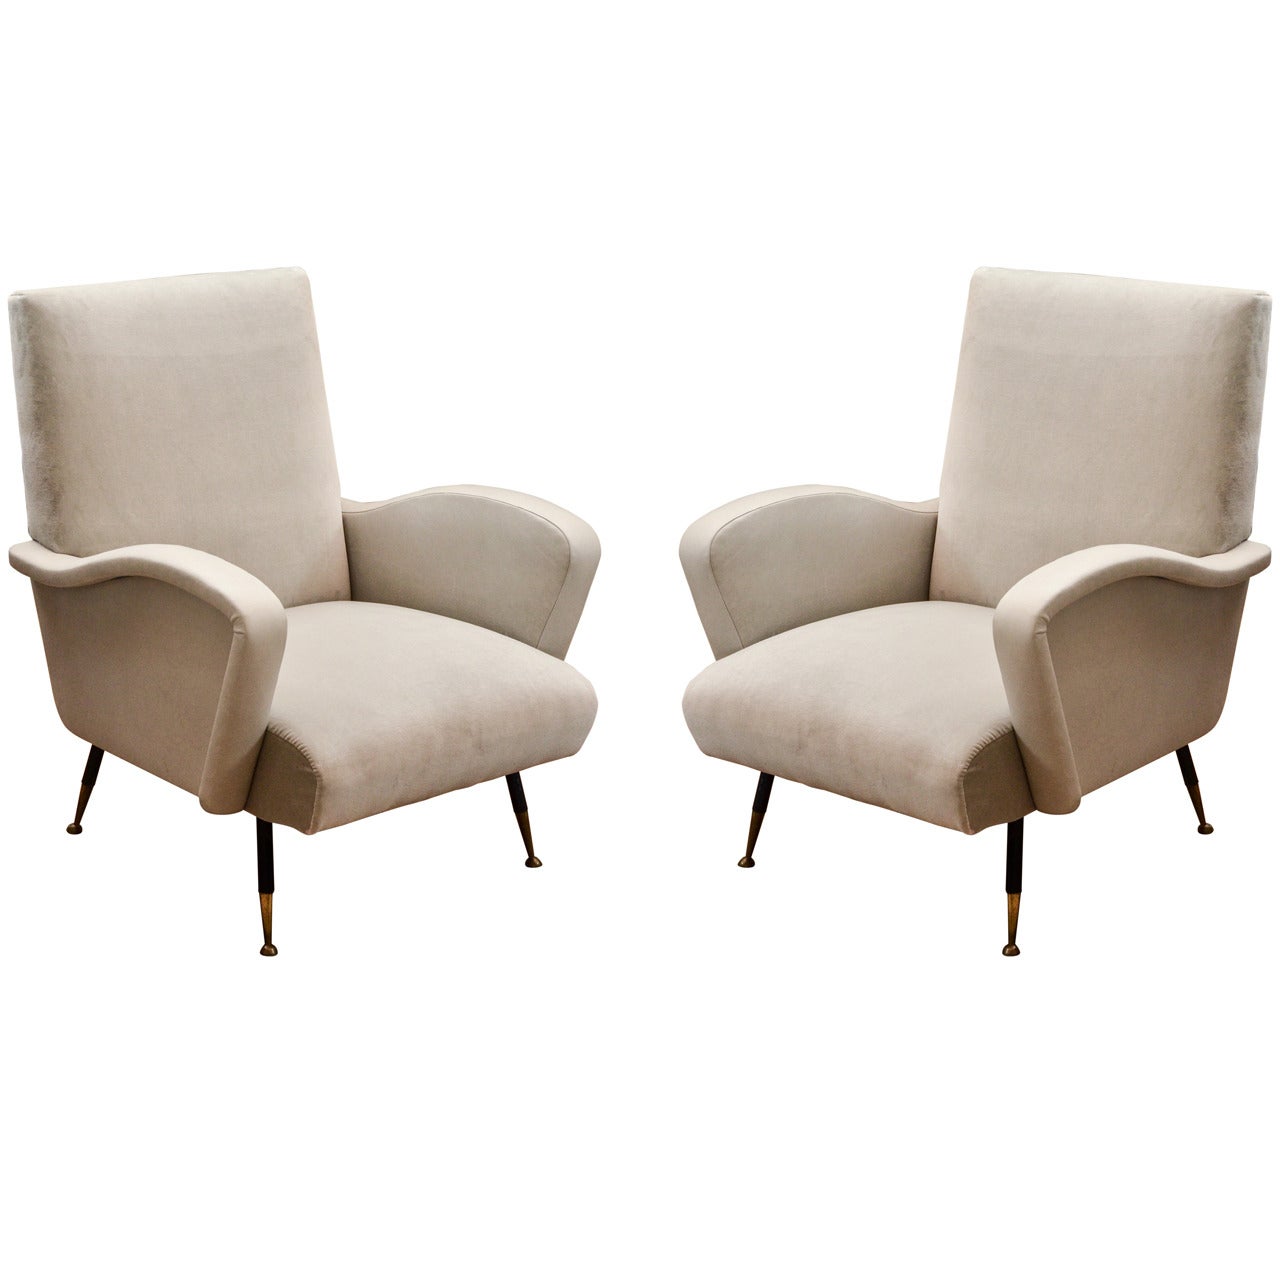 Pair of Italian Mid-century Armchairs in the Style of Gio Ponti in Velvet and Leather